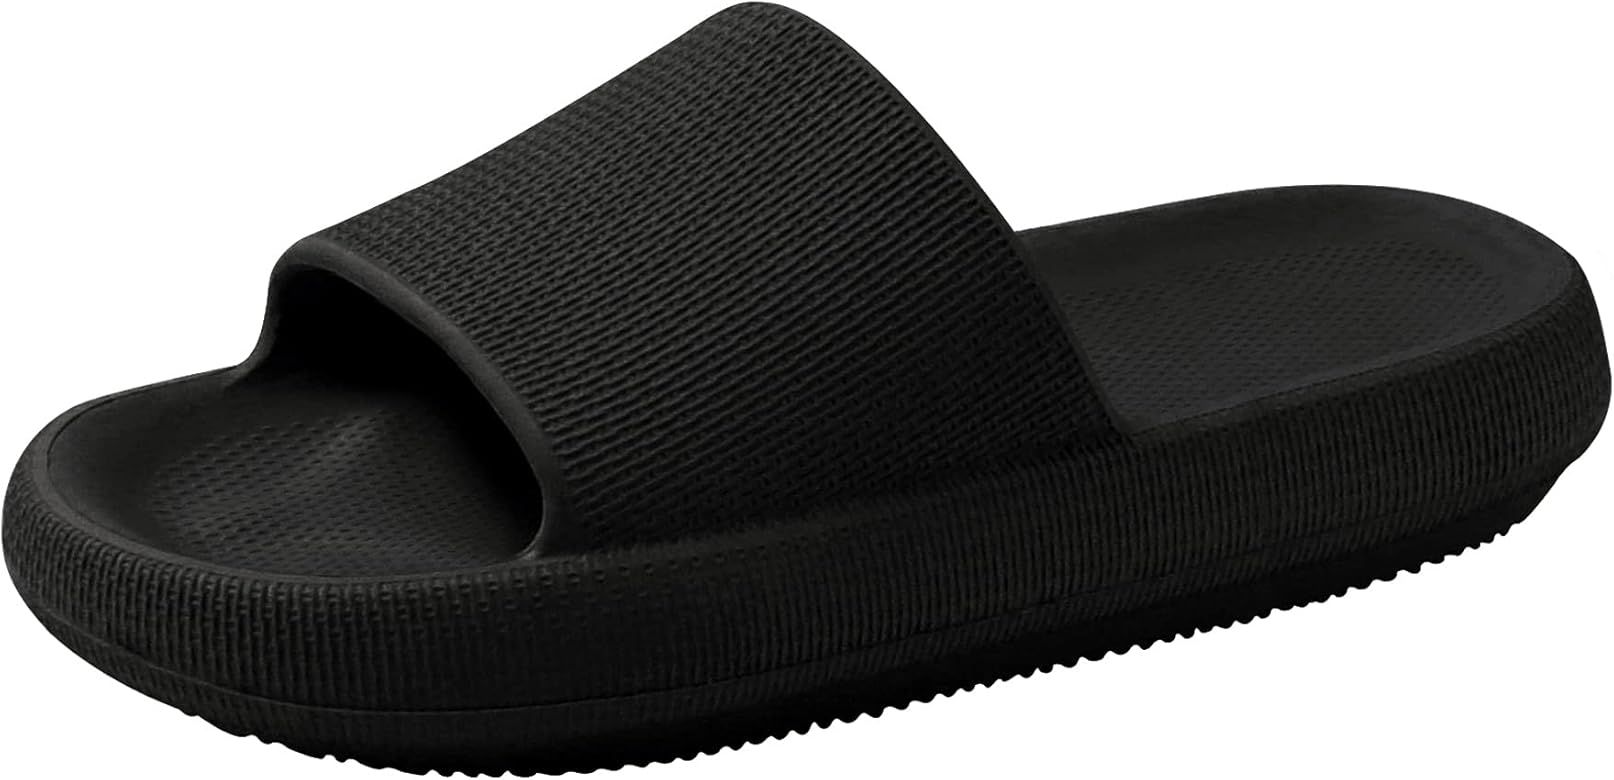 Athlefit Pillow Slides Shower Shoes Slippers Quick Drying Bathroom Sandals Soft Cushioned Extra T... | Amazon (US)